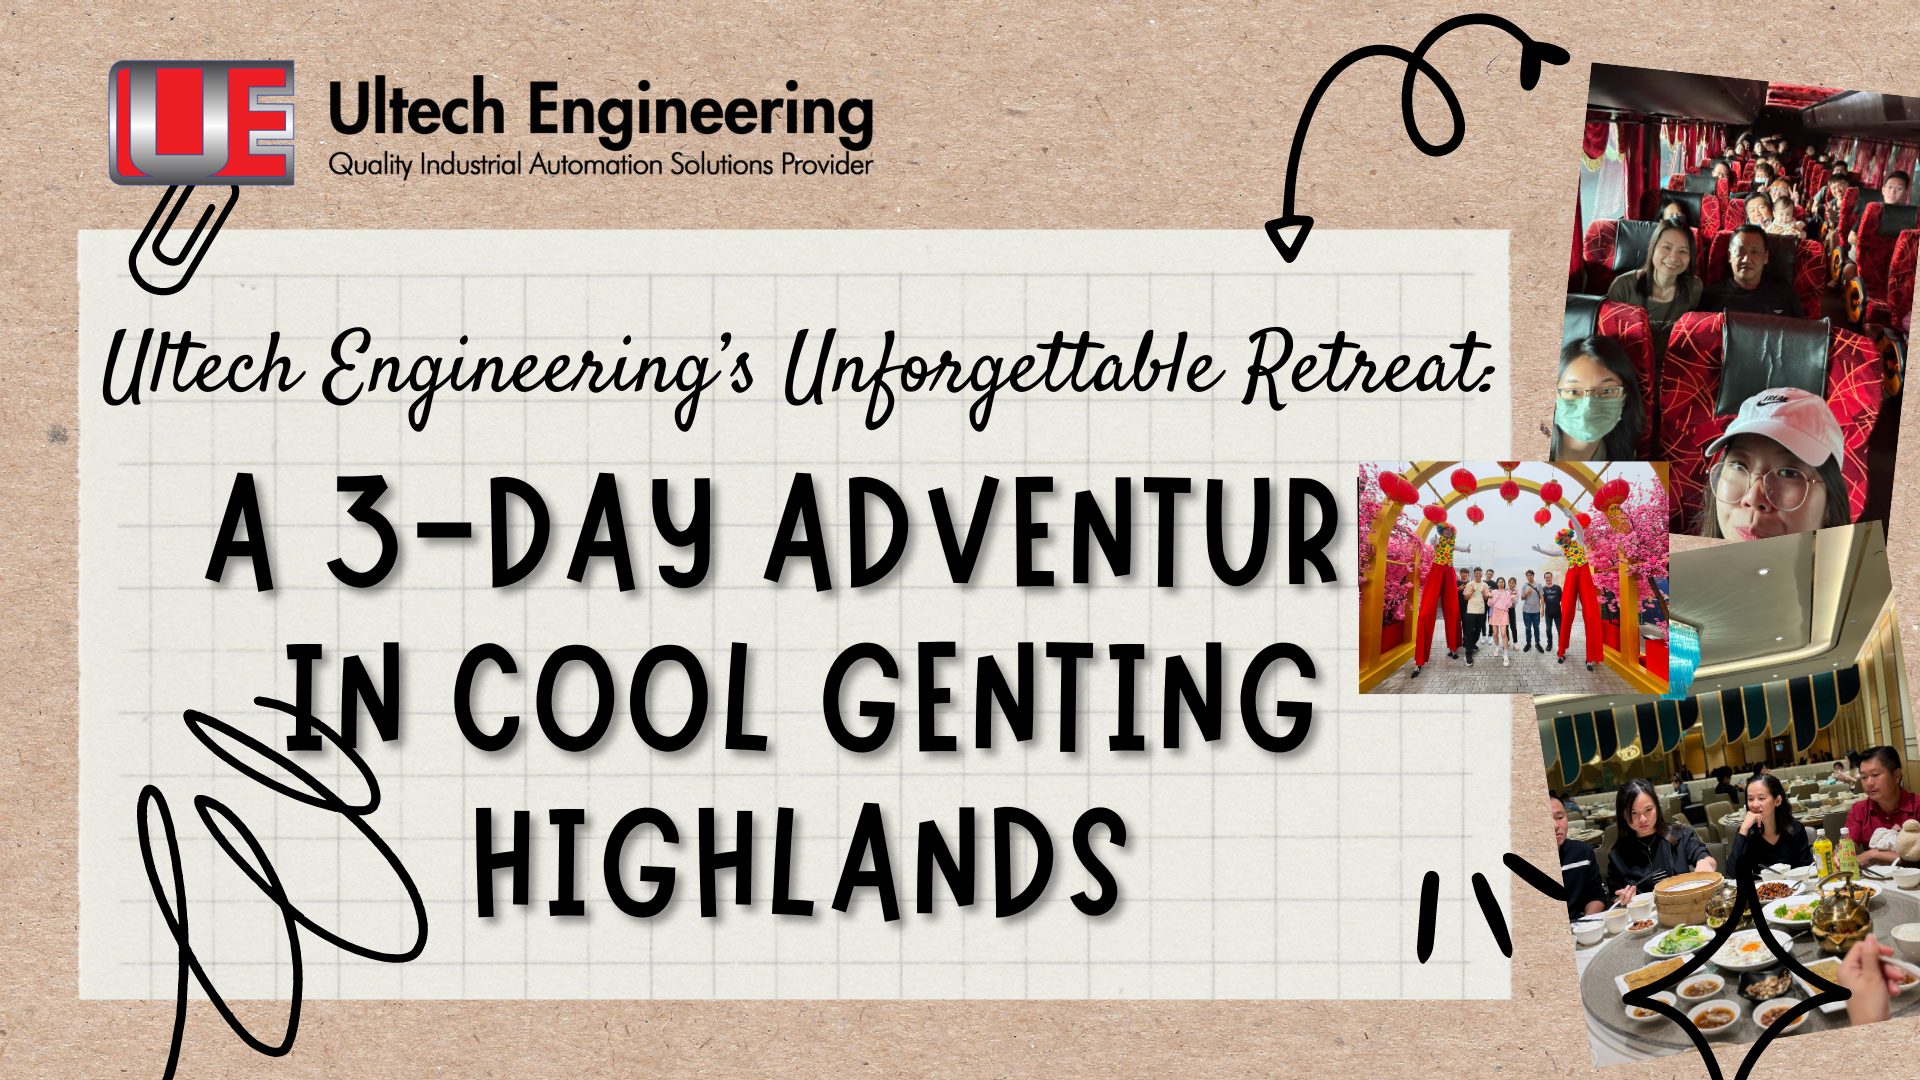 Ultech Engineering's Unforgettable Retreat: A 3-Day Adventure in Cool Genting Highlands